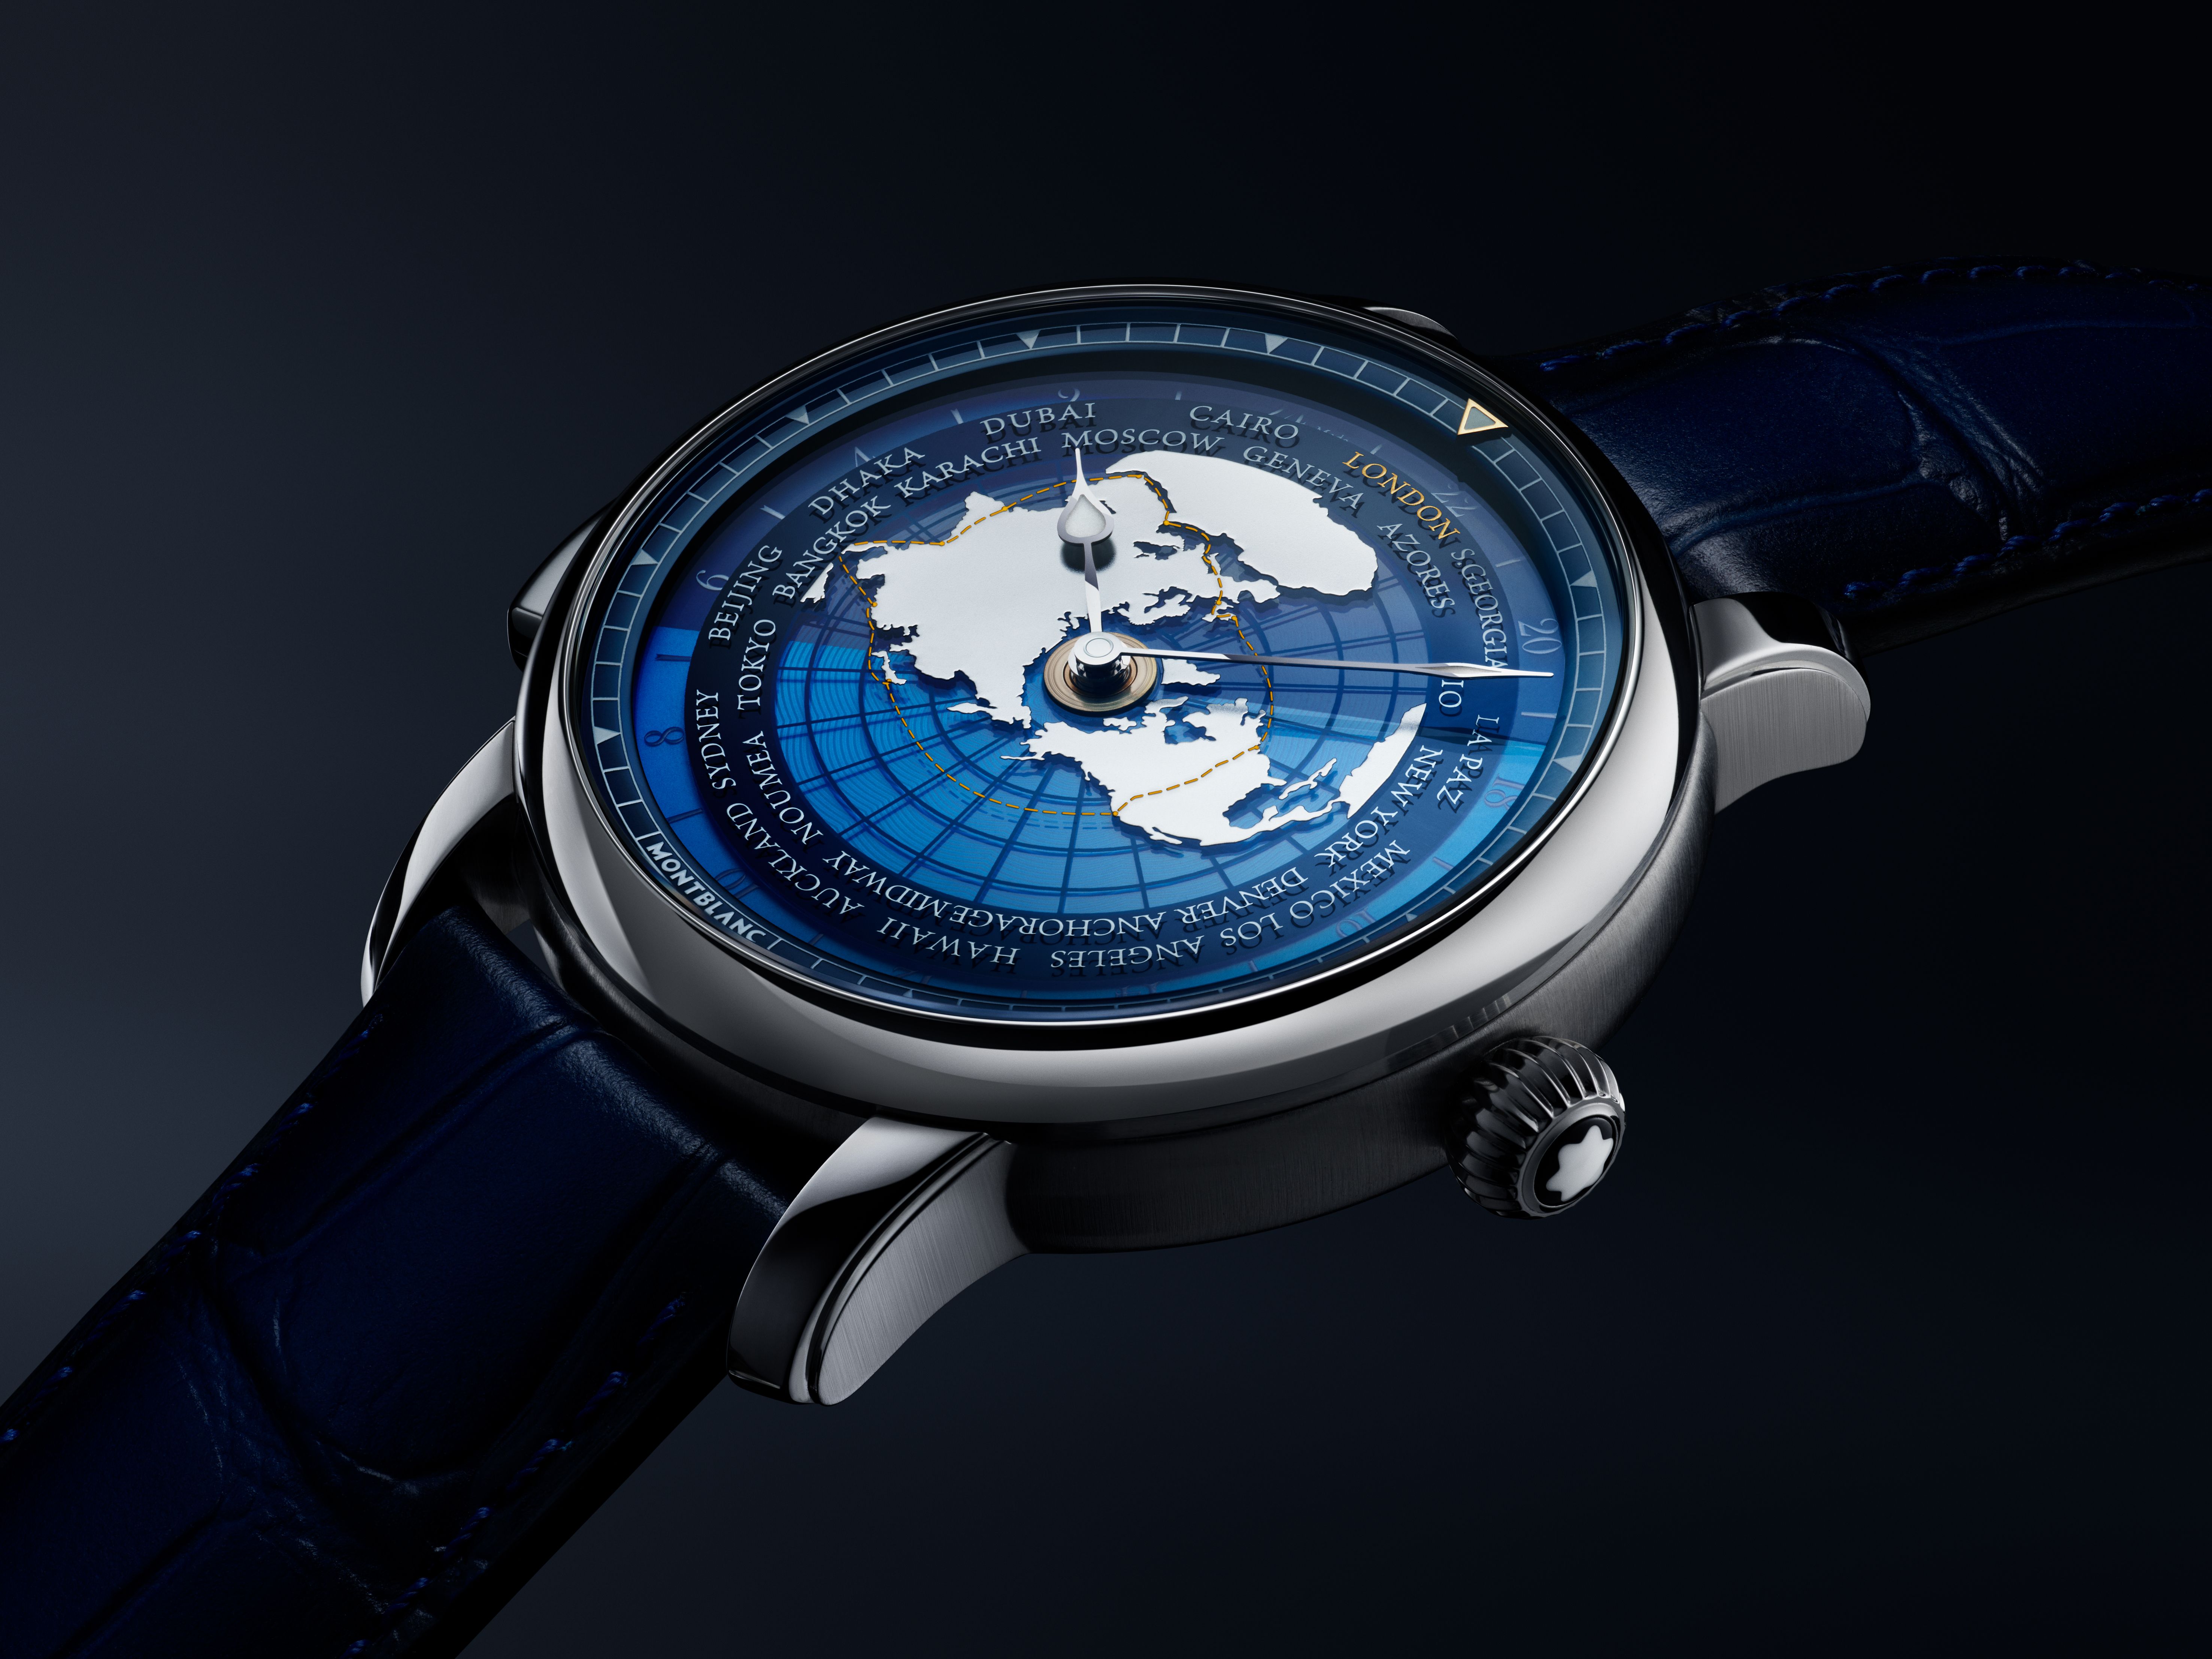 The watch features an elaborate world timer complication